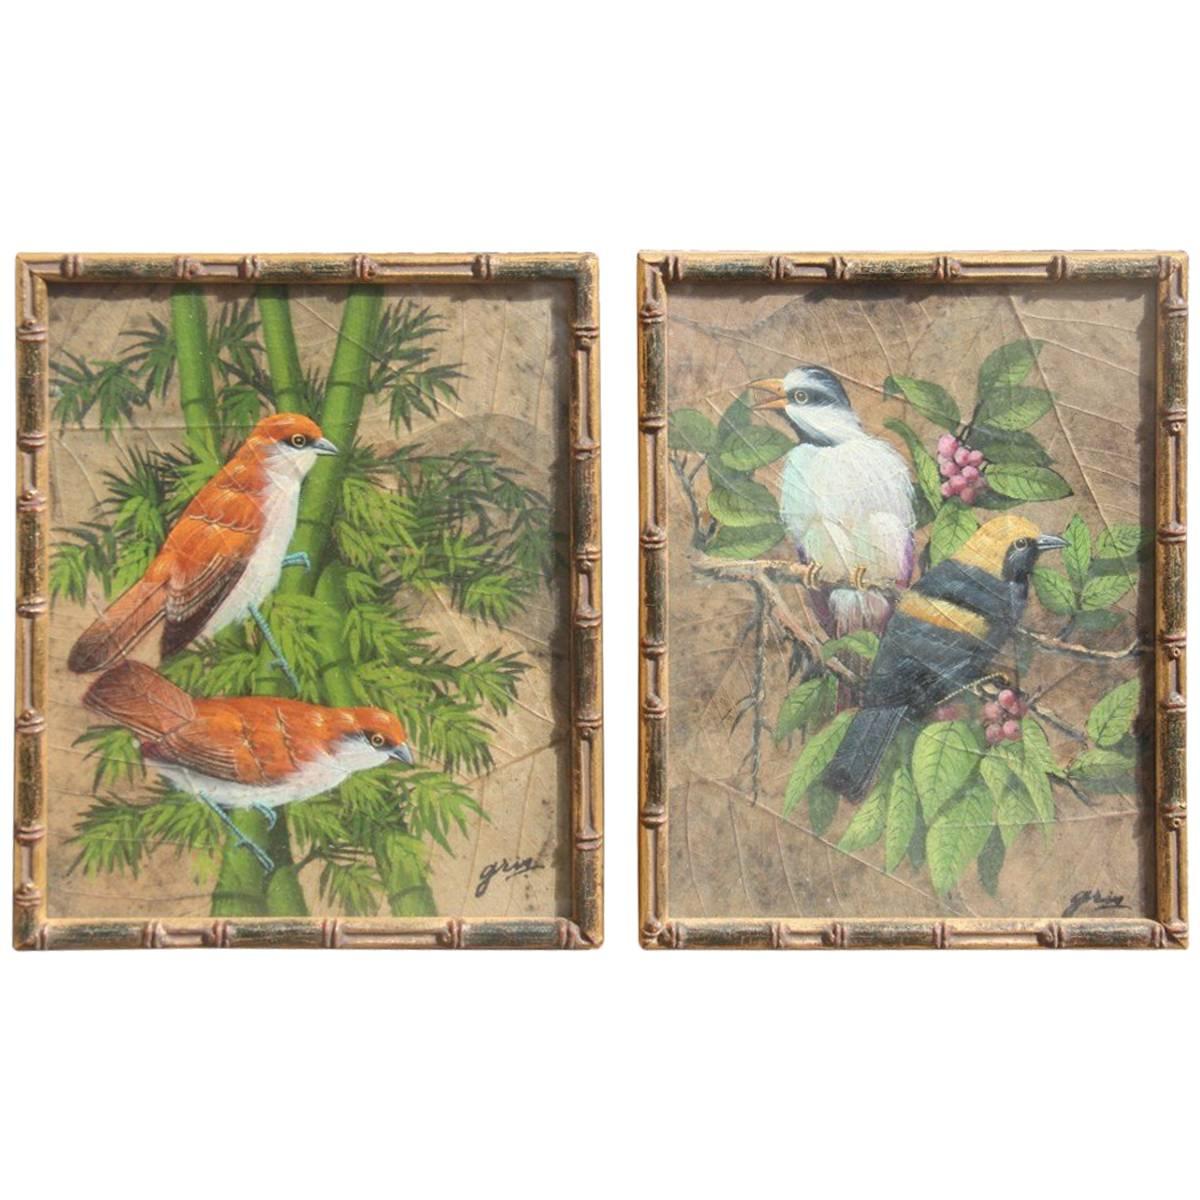 Paintings of Birds on Leaves 1970s Art Decoration